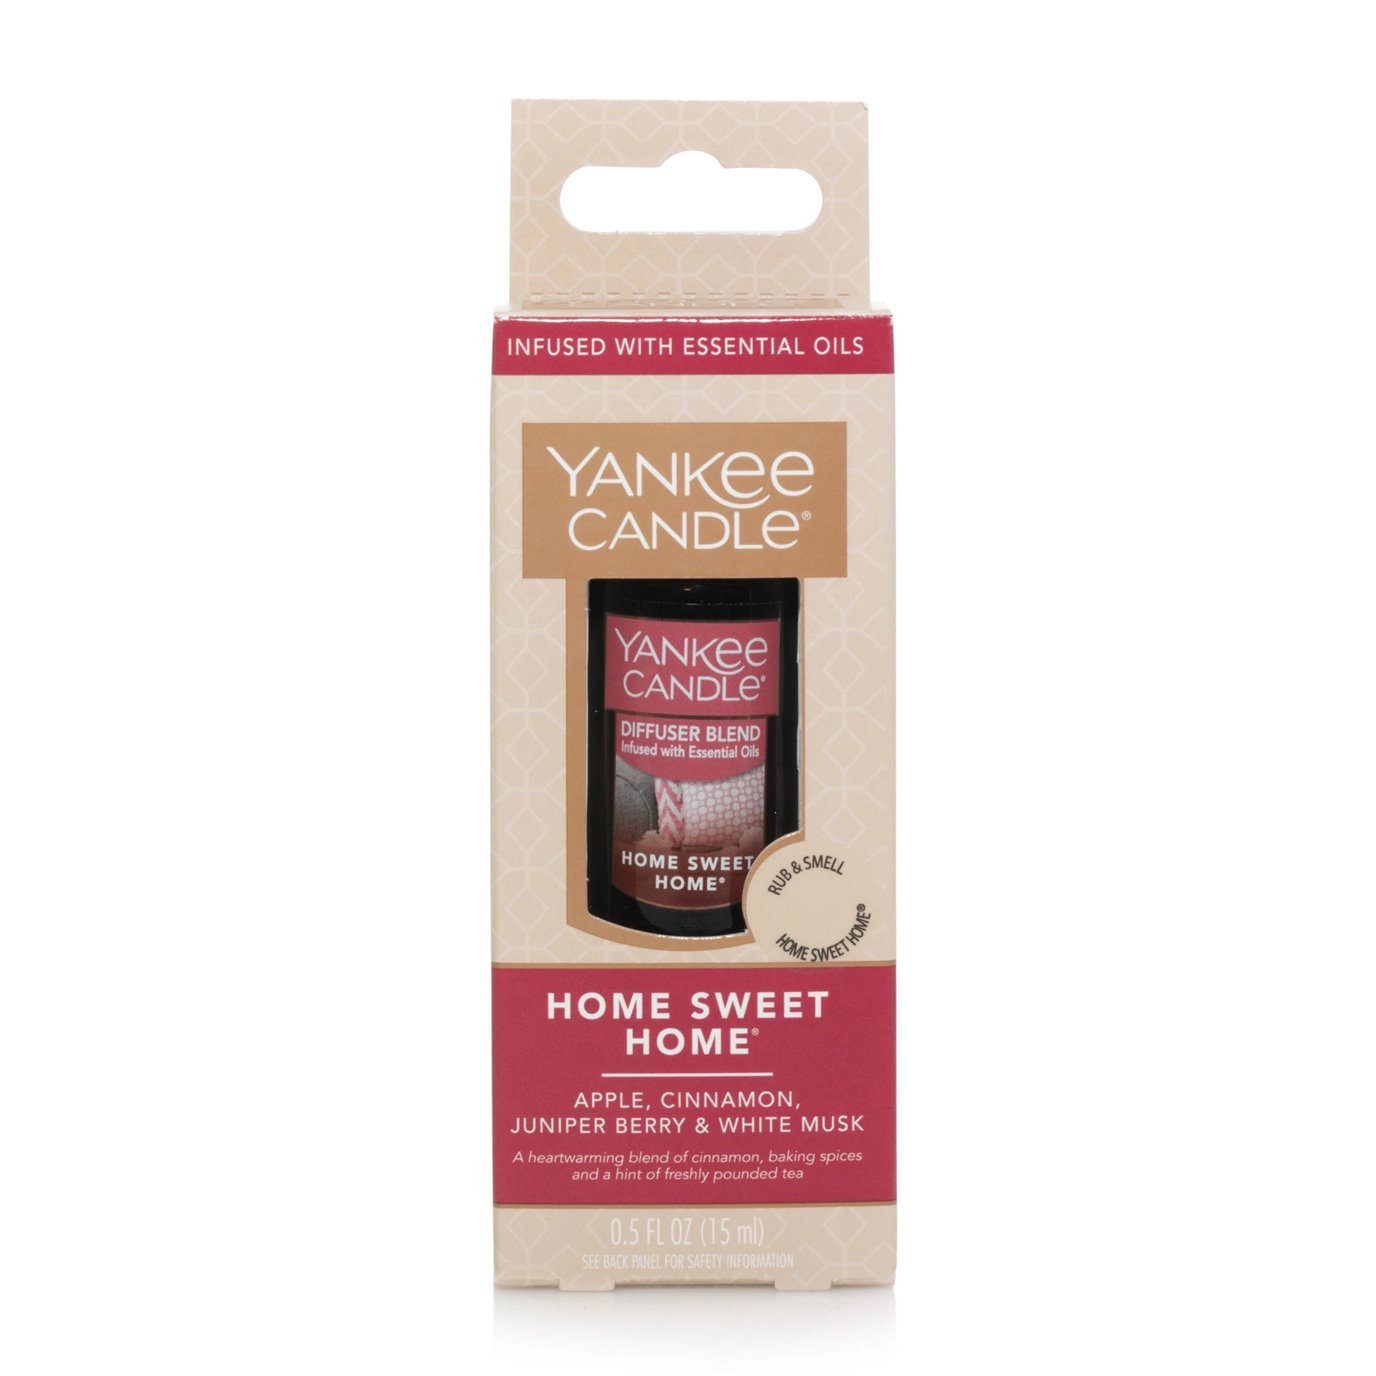 Yankee Candle Home Sweet Home Aroma Oil Home Fragrance